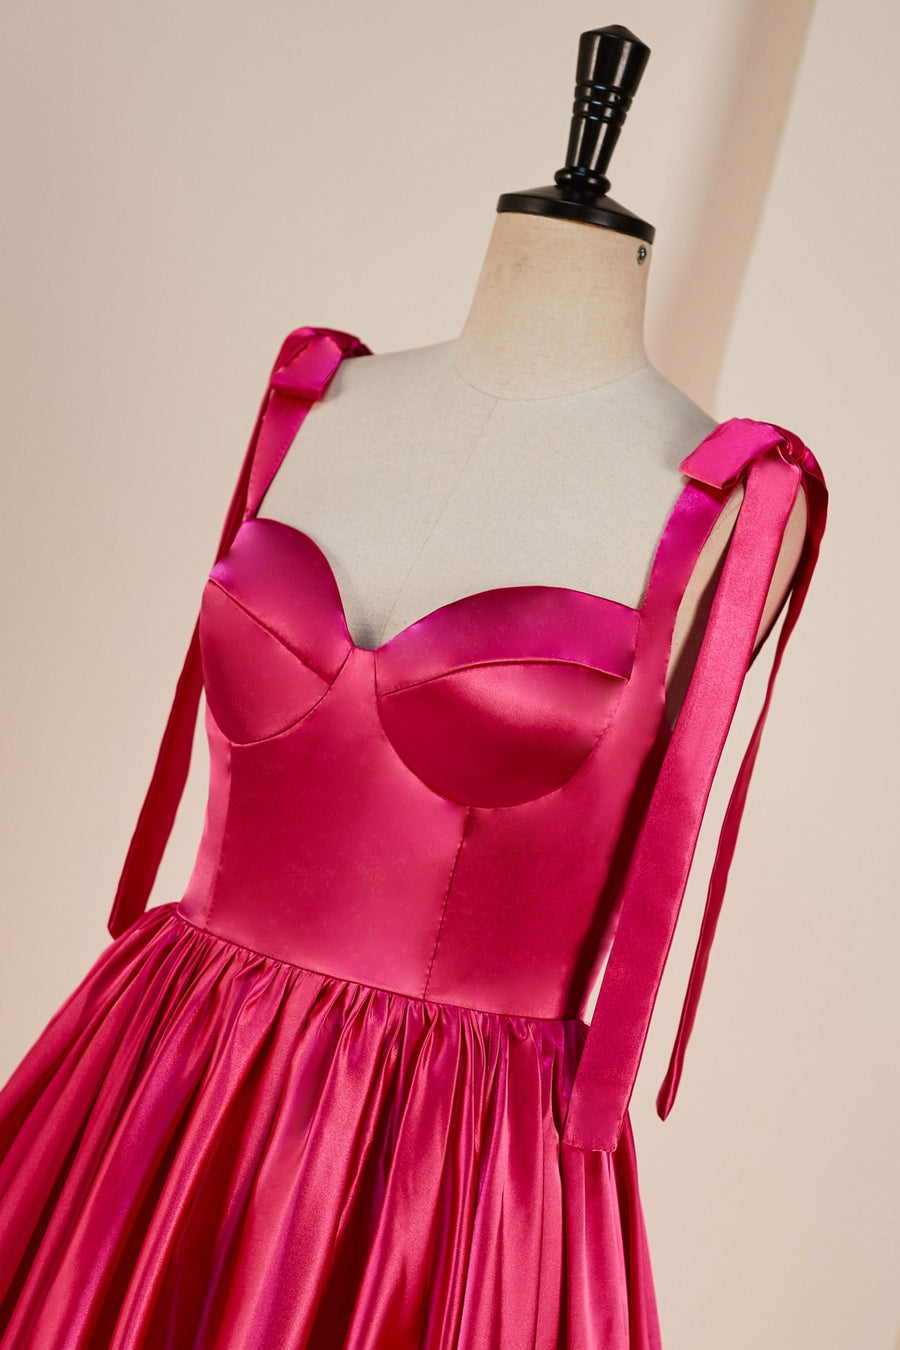 Rose Pink A-line Bow Tie Straps Ruffled Satin Homecoming Dress